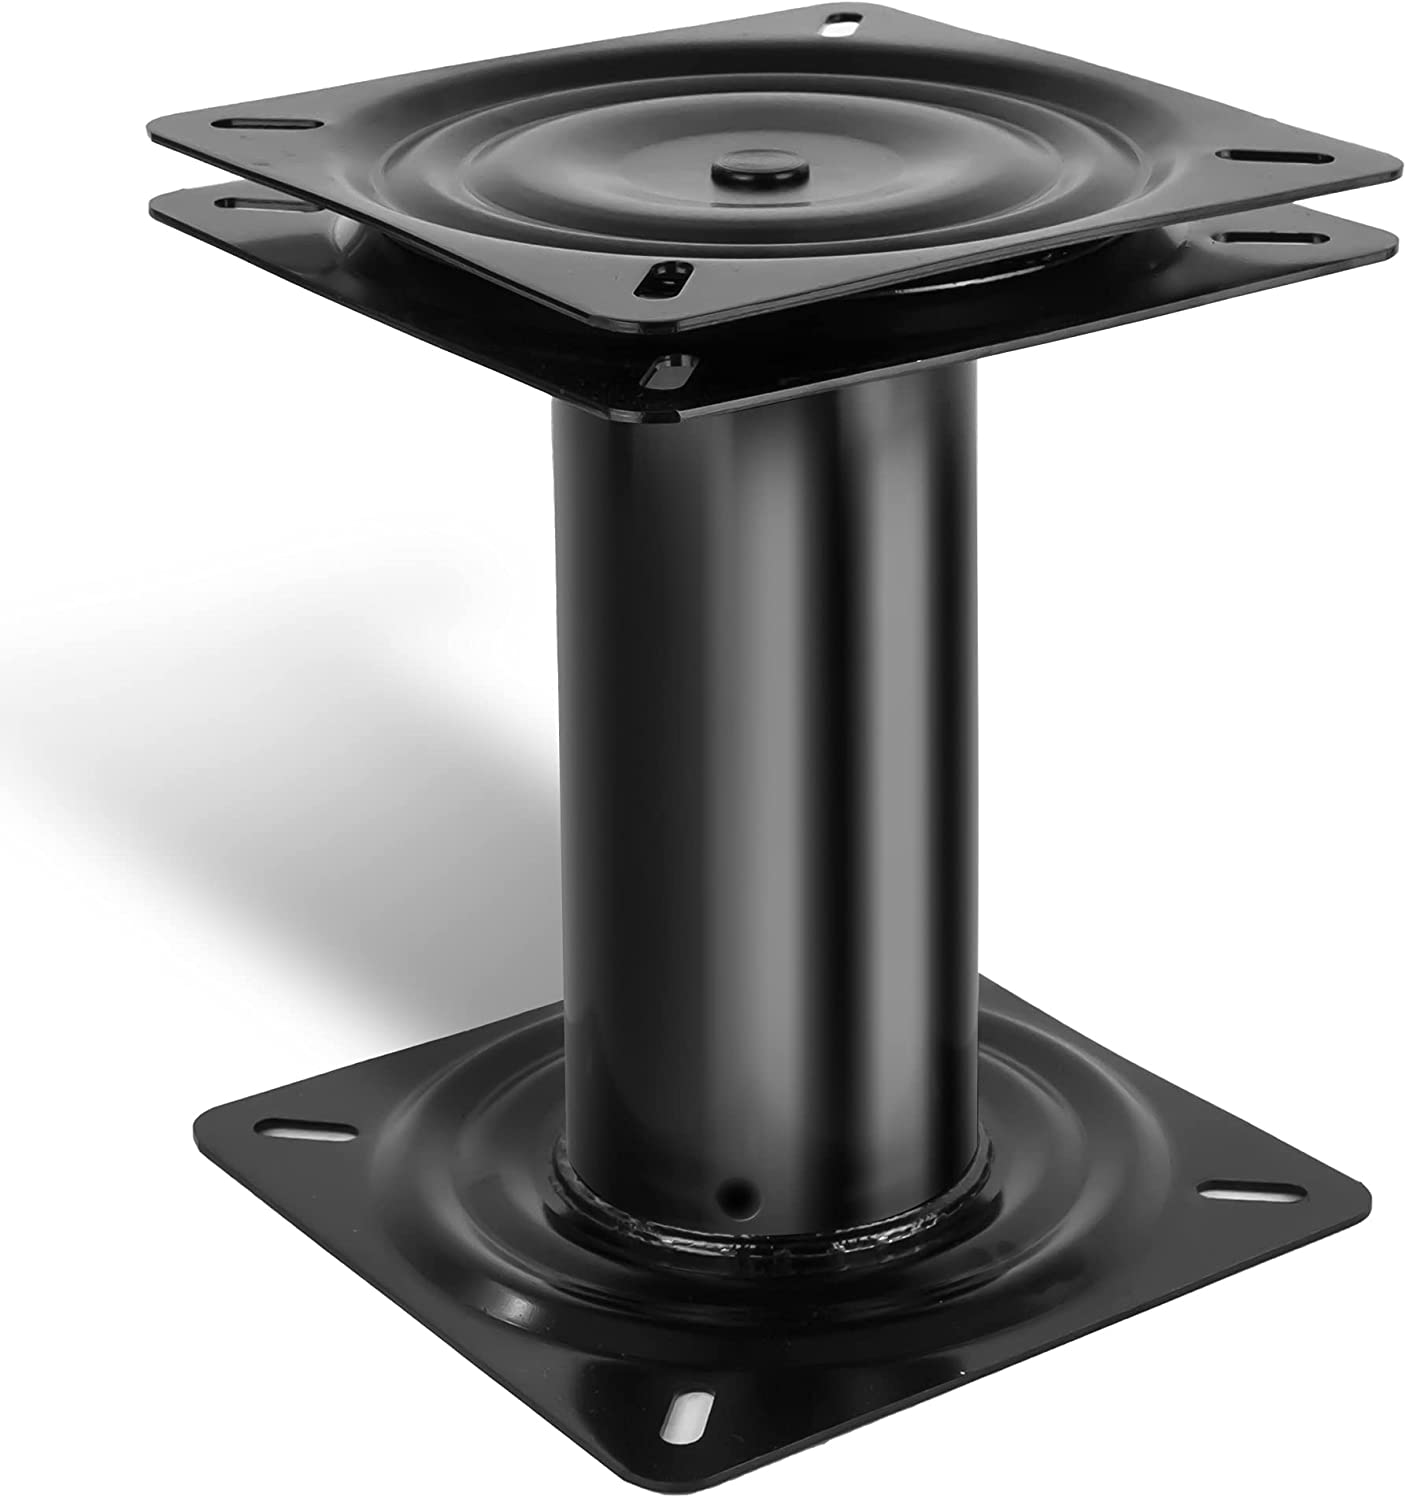 Boat Seat Pedestals, Pedestal Boat Seat Base, Fixed Height 12 Inches, 360 Degree Seat Base Rotation, Premium Marine-Grade Aluminum with E-Coating